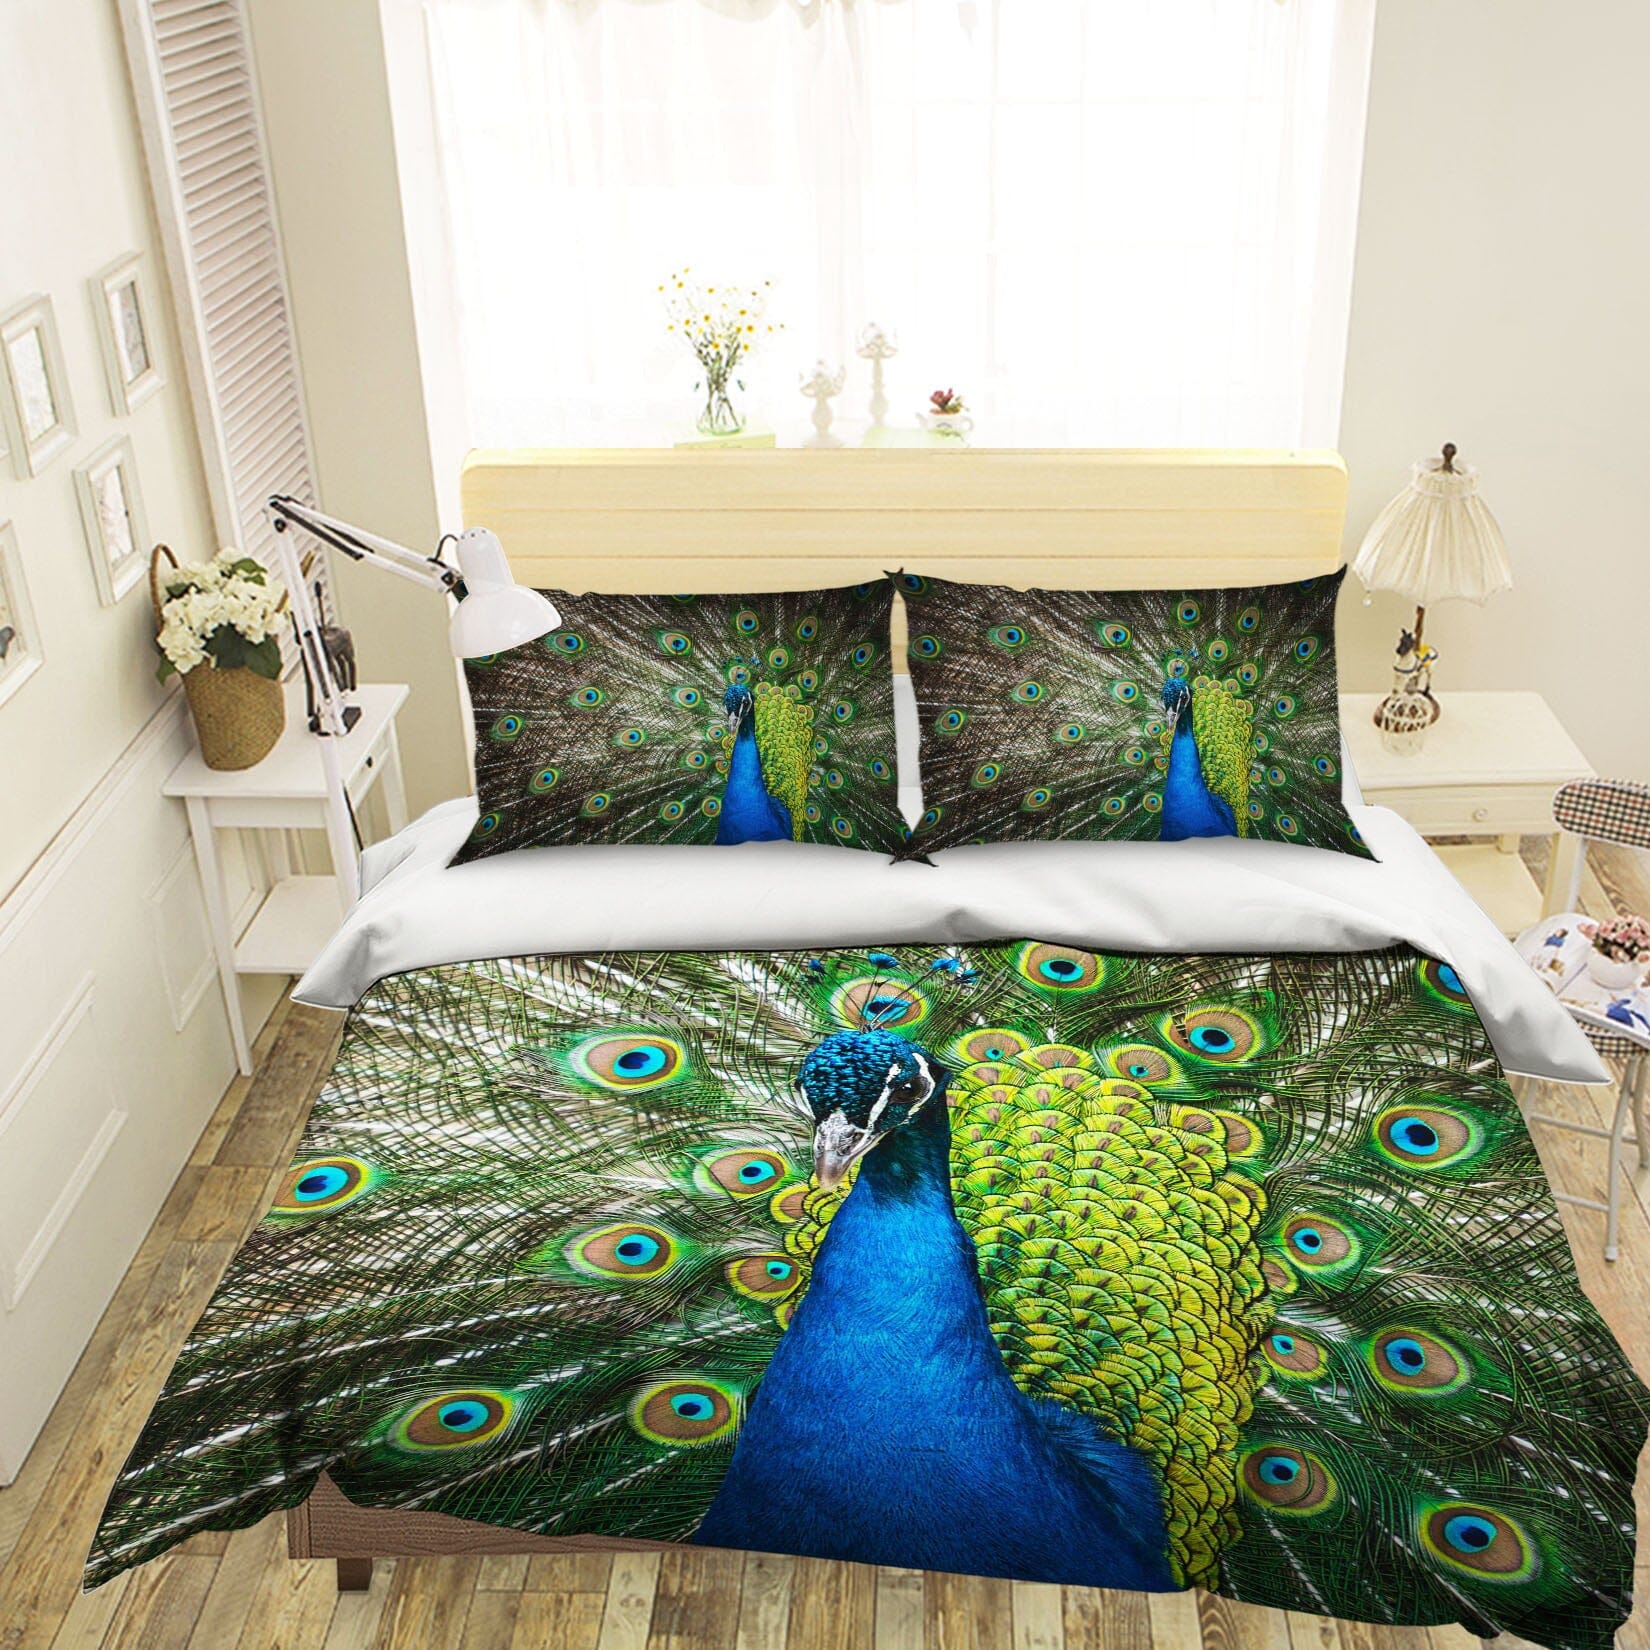 3D Peacock 1918 Bed Pillowcases Quilt Quiet Covers AJ Creativity Home 